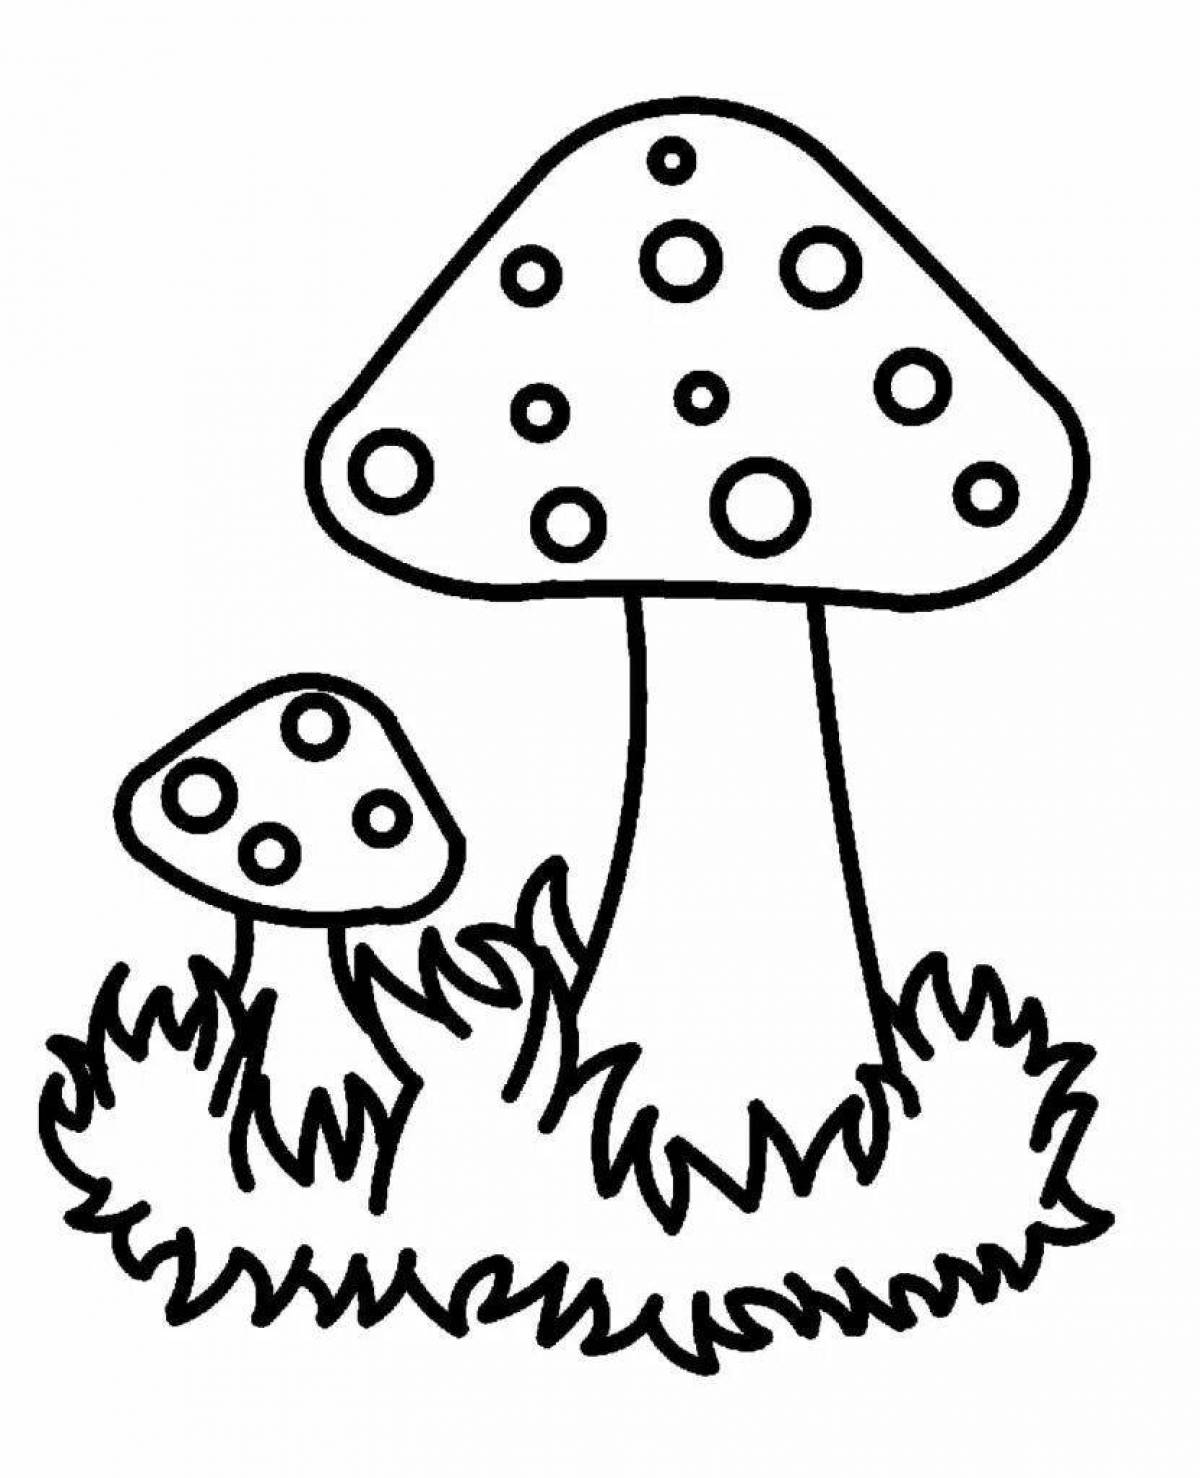 Amazing mushroom coloring page for 4-5 year olds